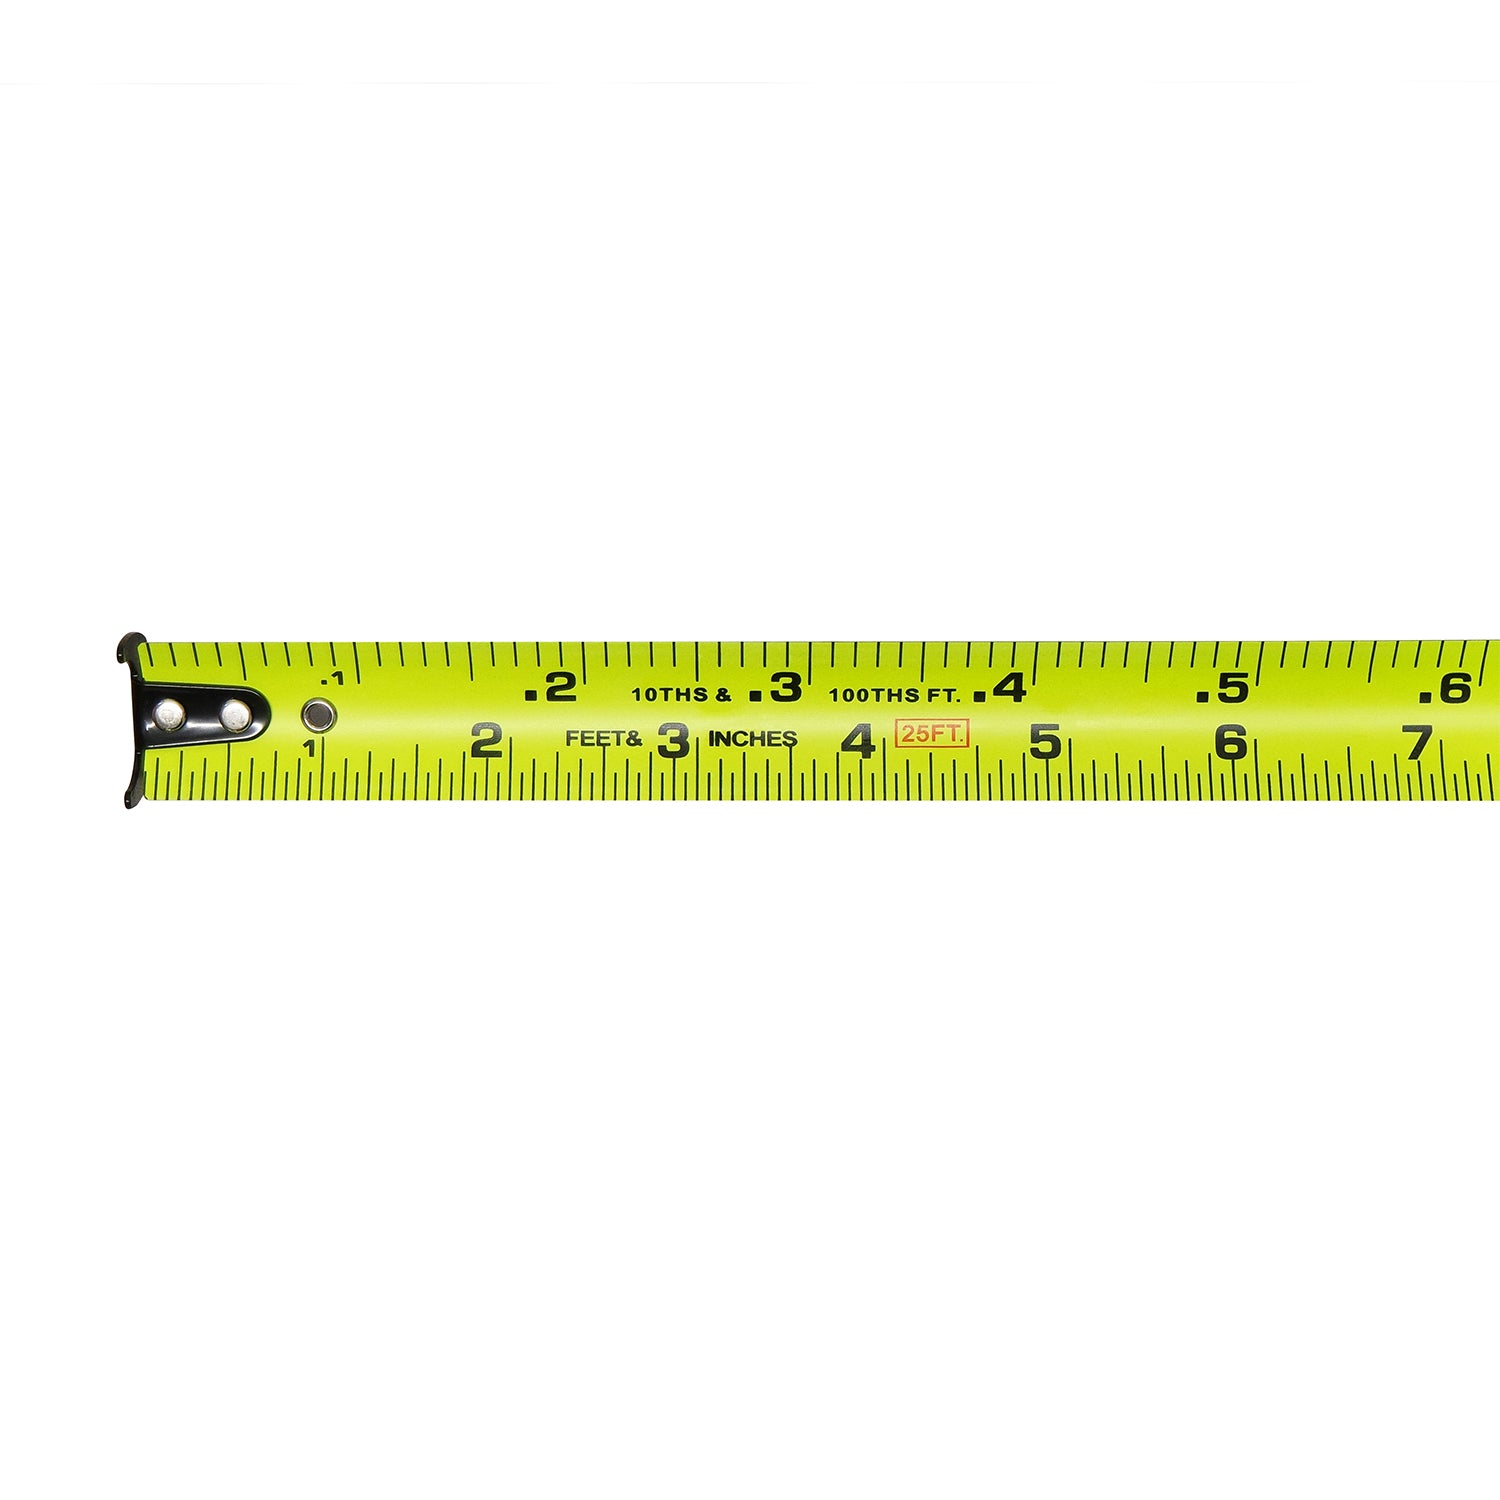 Keson 25' Ultra Bright Blade Tape Measure (Inches/Ft/10ths/100ths/8ths/16ths) -Measurement Tools- eGPS Solutions Inc.